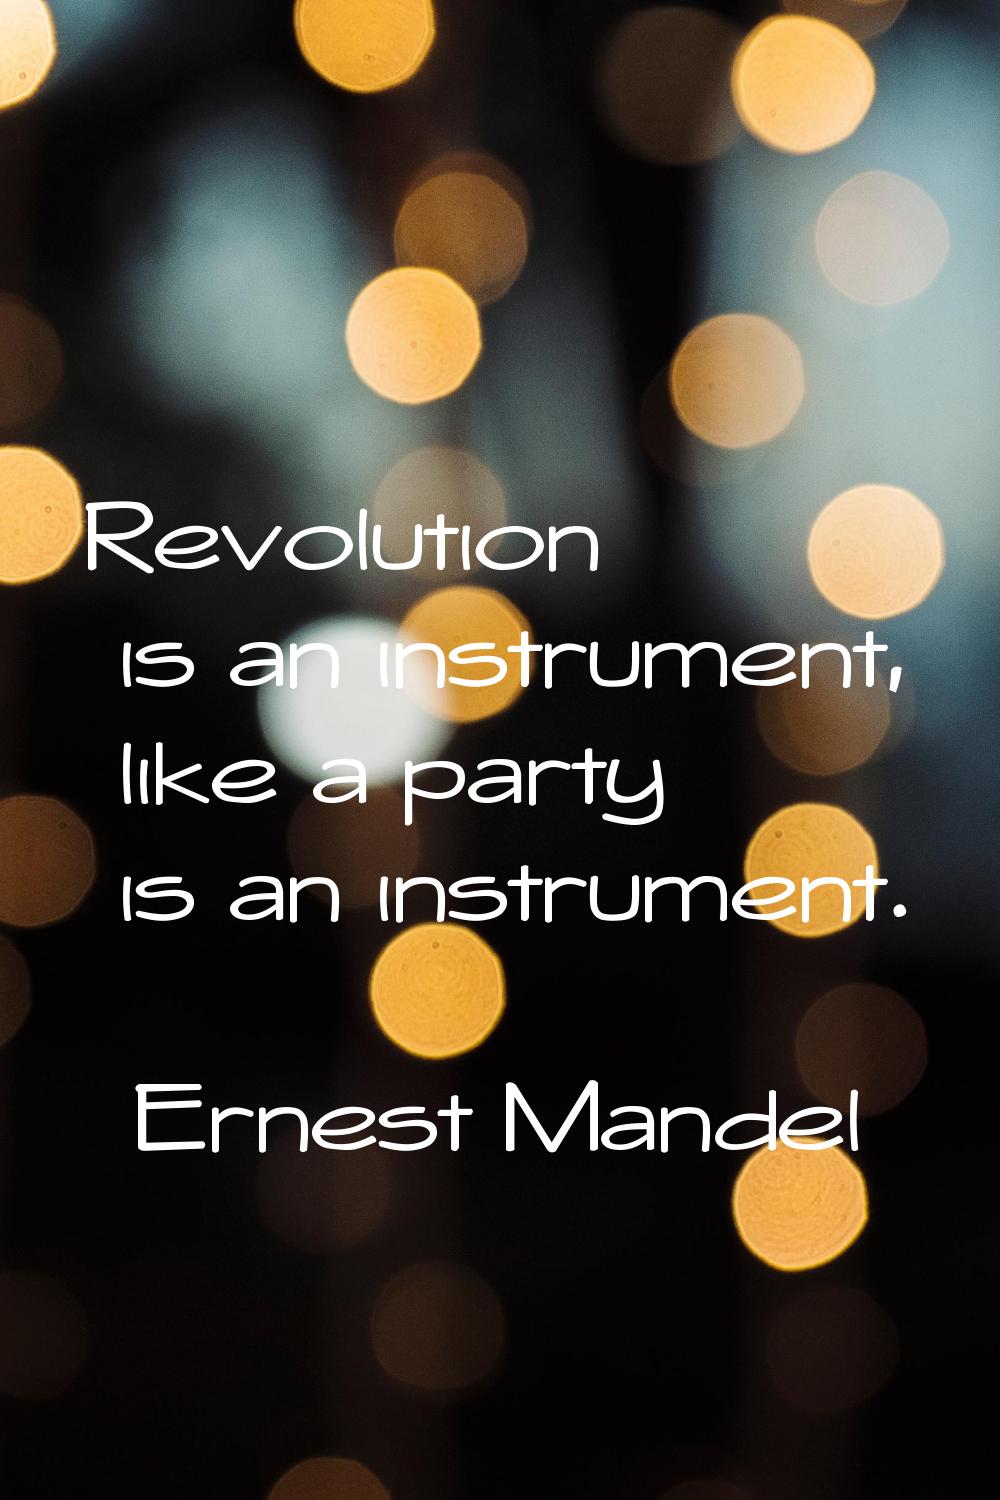 Revolution is an instrument, like a party is an instrument.